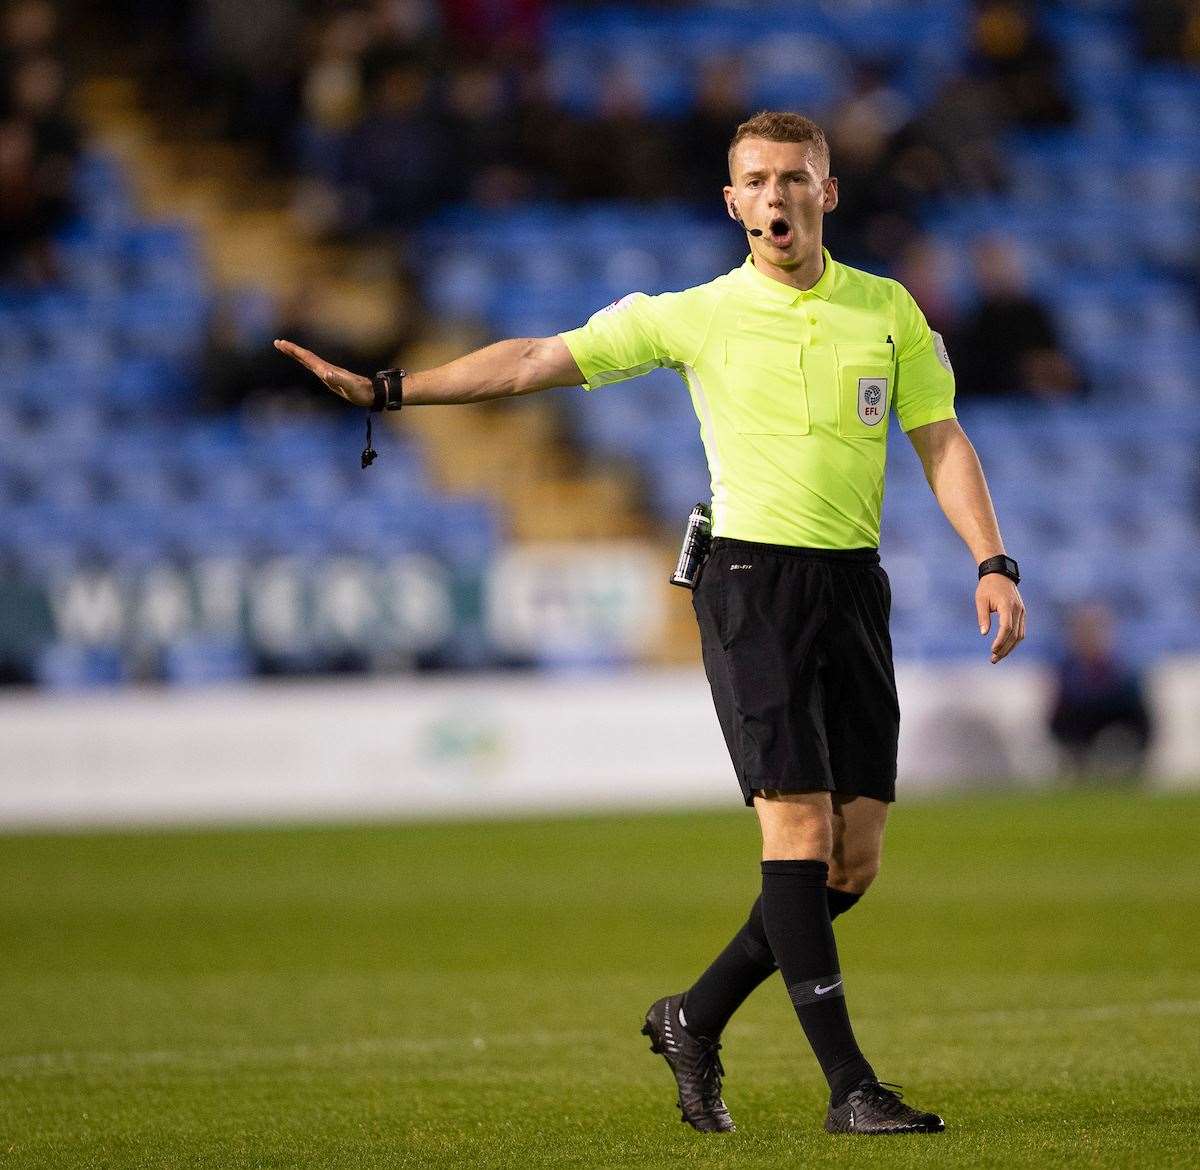 Referee Will Finnie in charge of the game Picture: Ady Kerry (19947687)